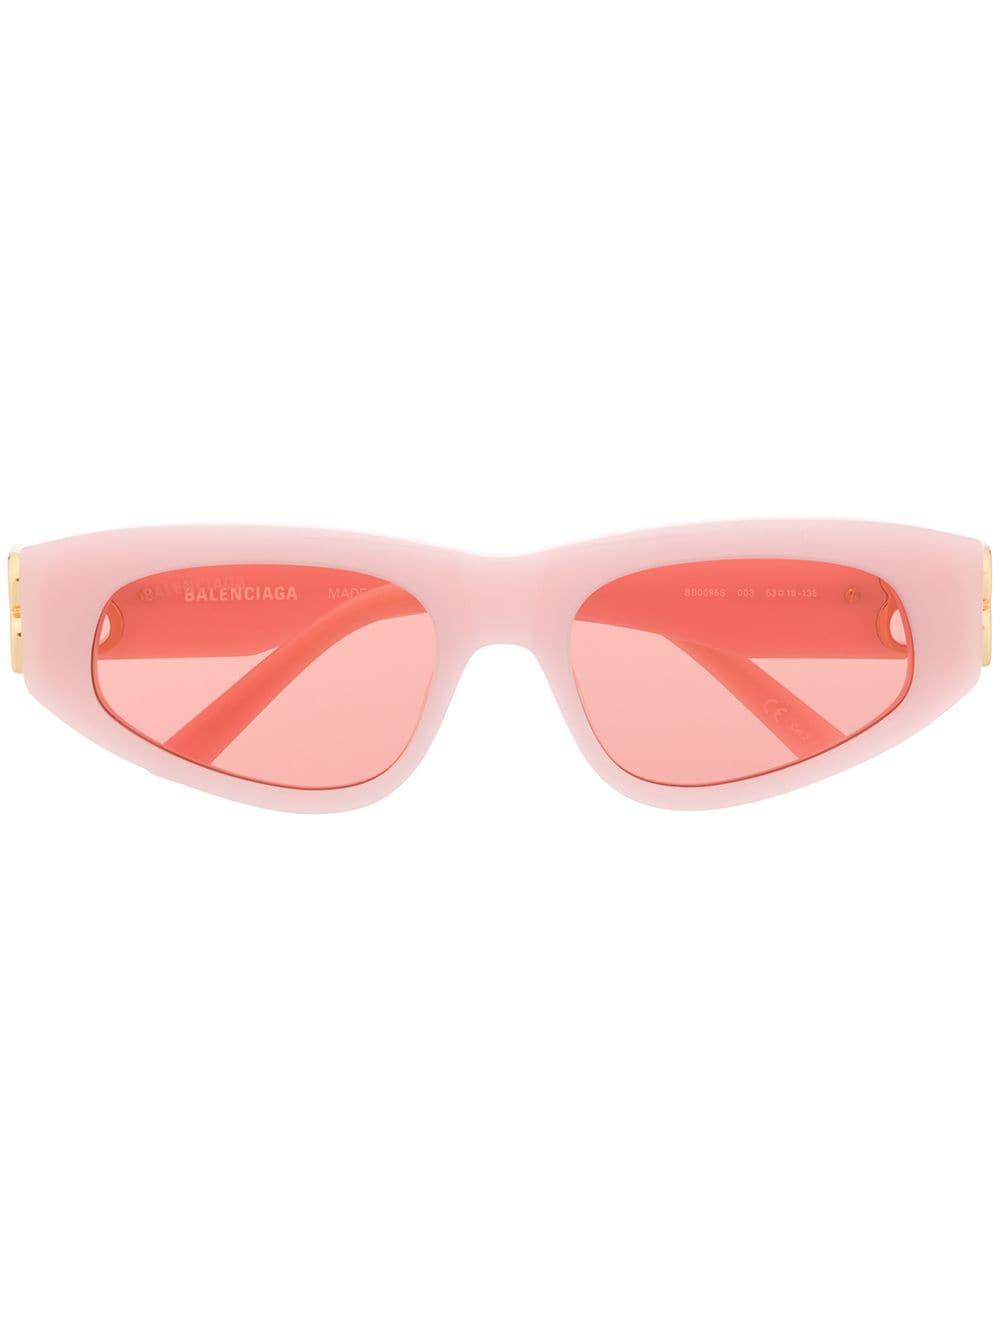 Balenciaga Bb0095s Rectangle-frame Sunglasses in Pink - Lyst